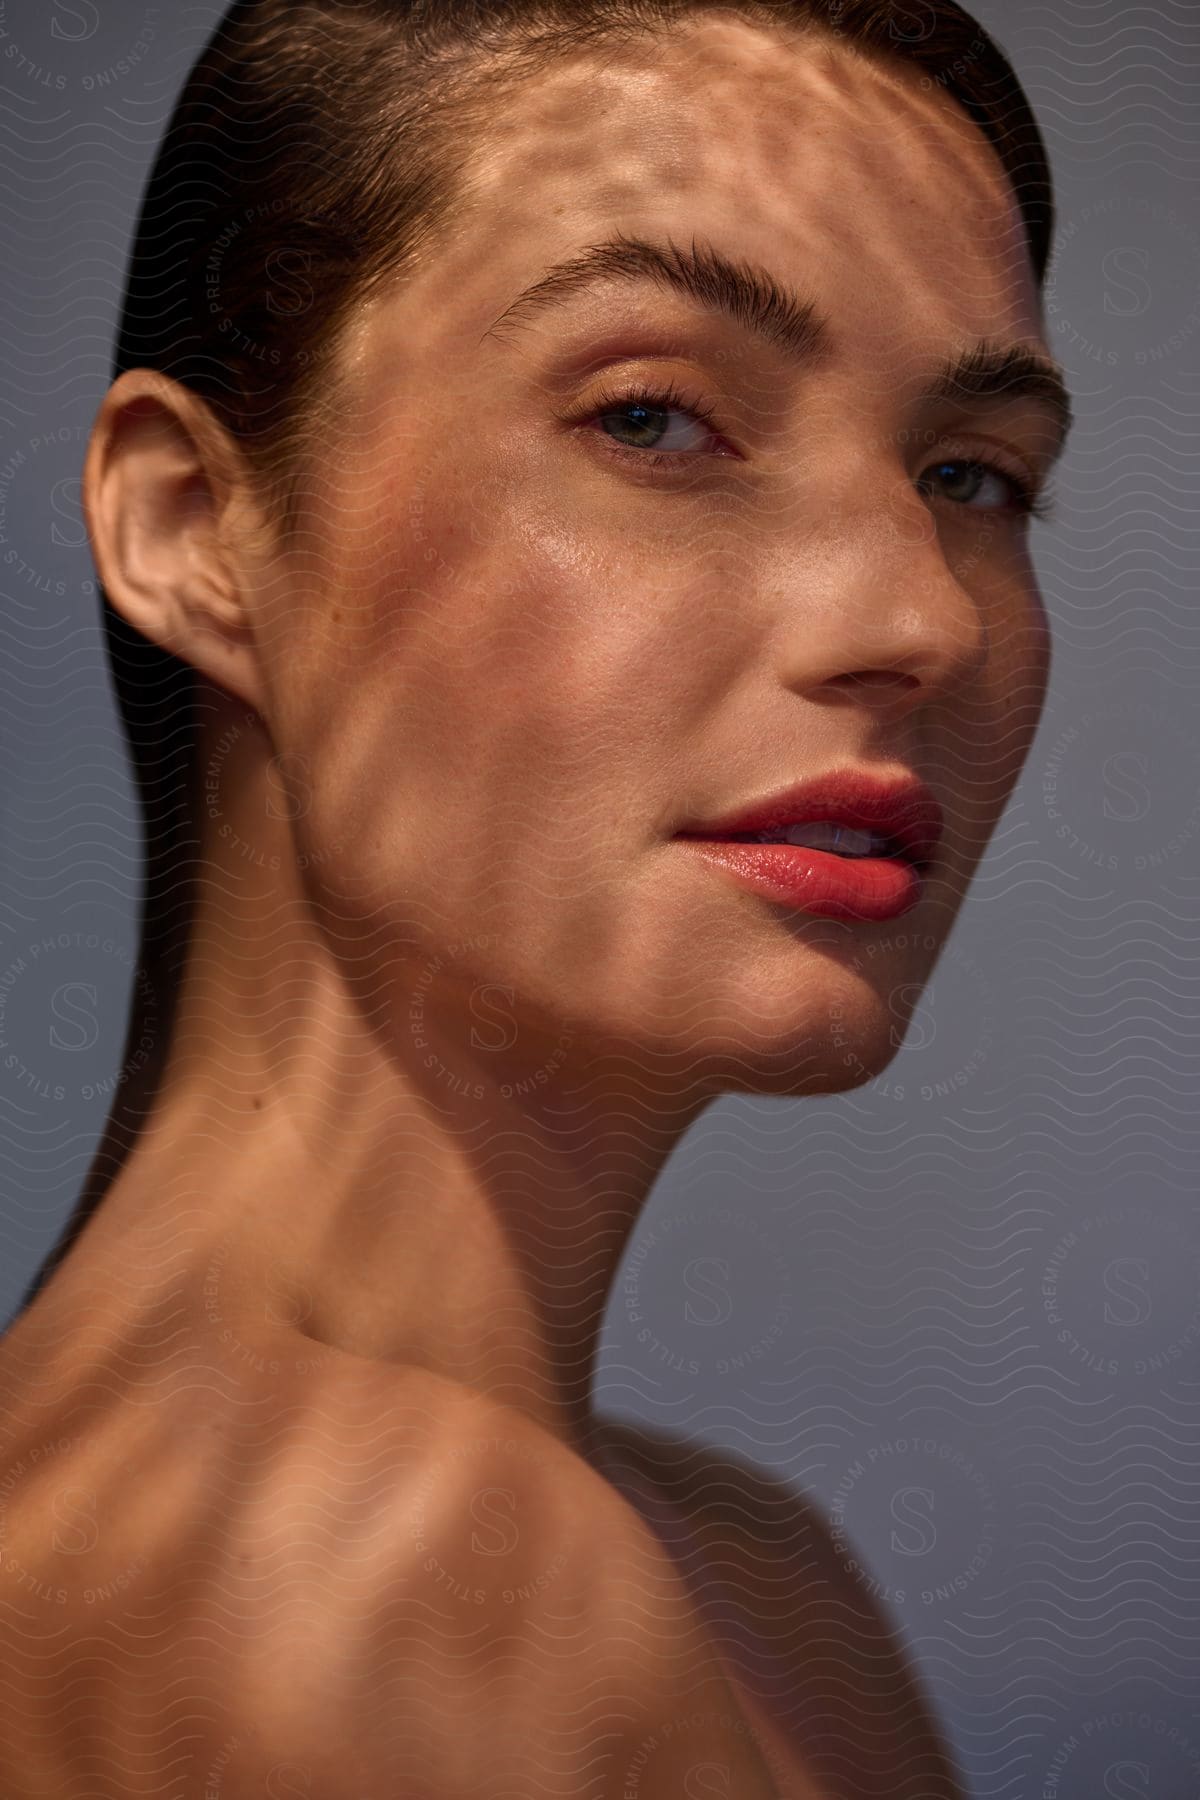 Light shines on the face of a woman wearing red lipstick as she looks from her side